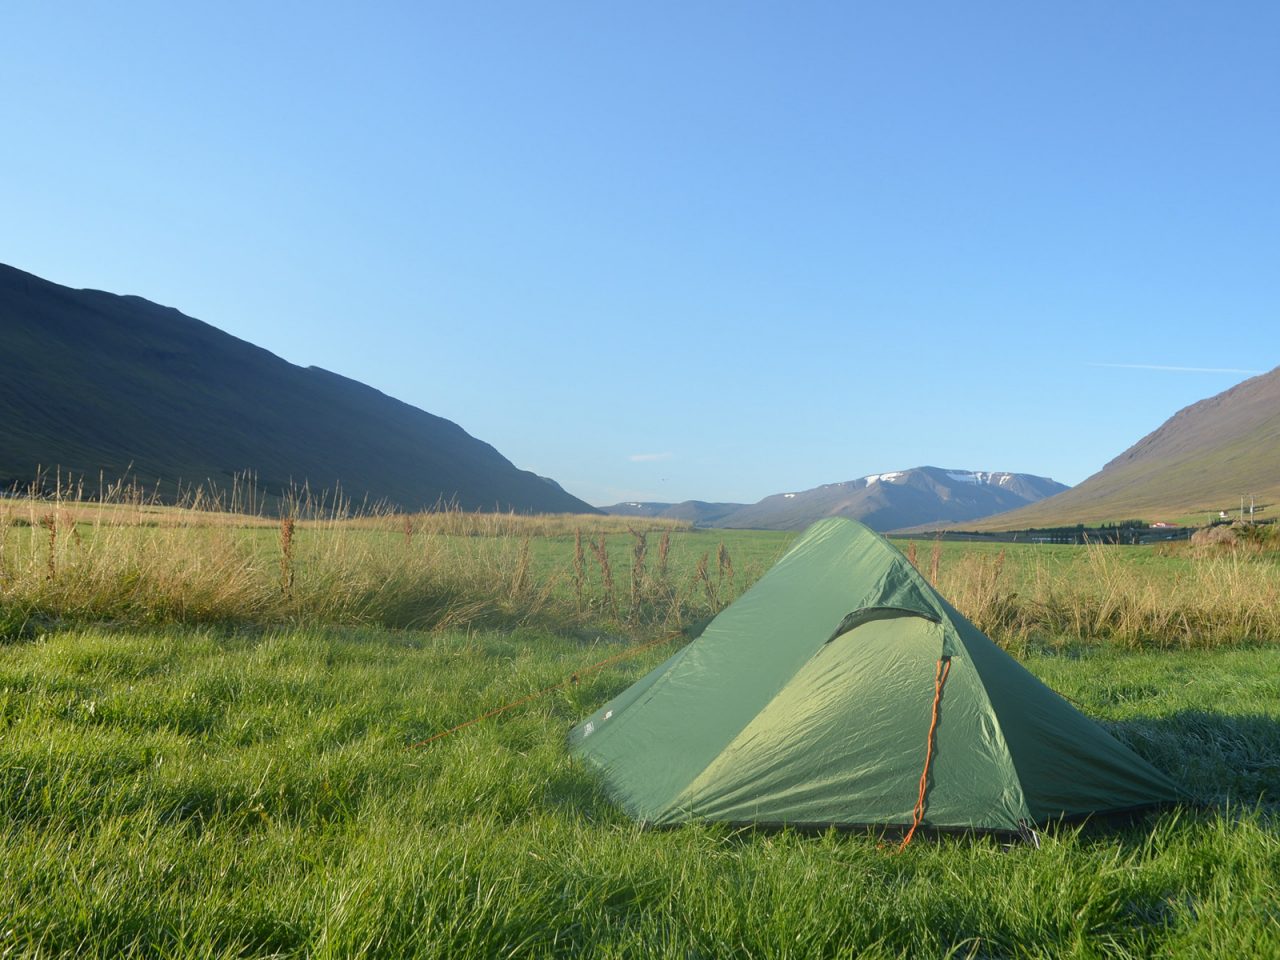 Grassy Field in Iceland - Free Camping